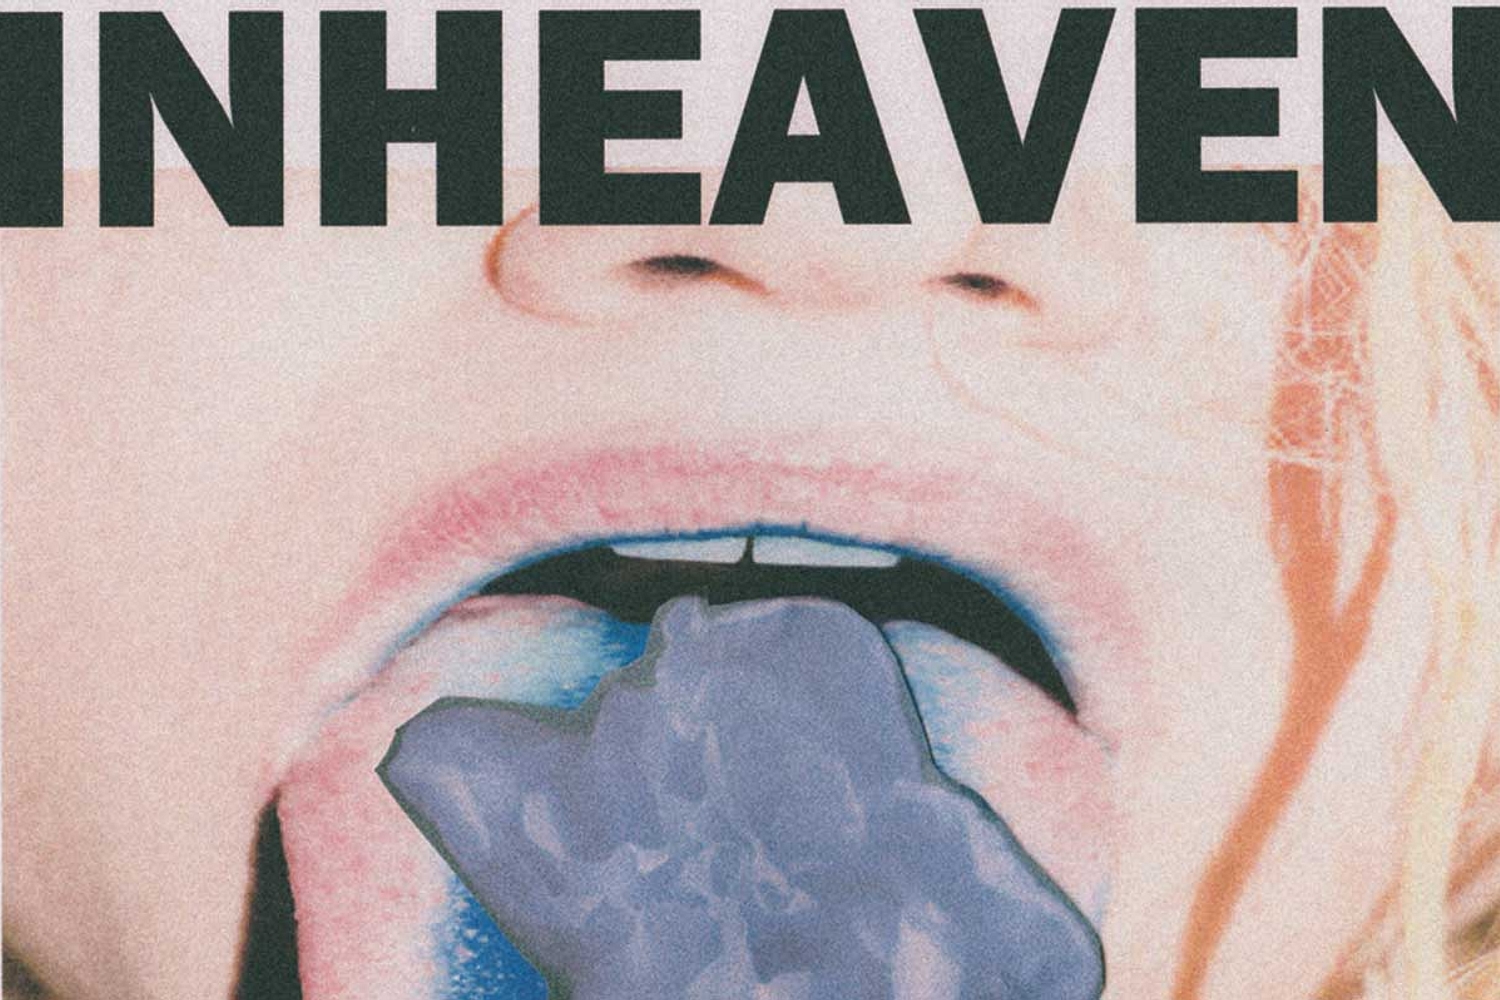 INHEAVEN share new track ‘Slow’